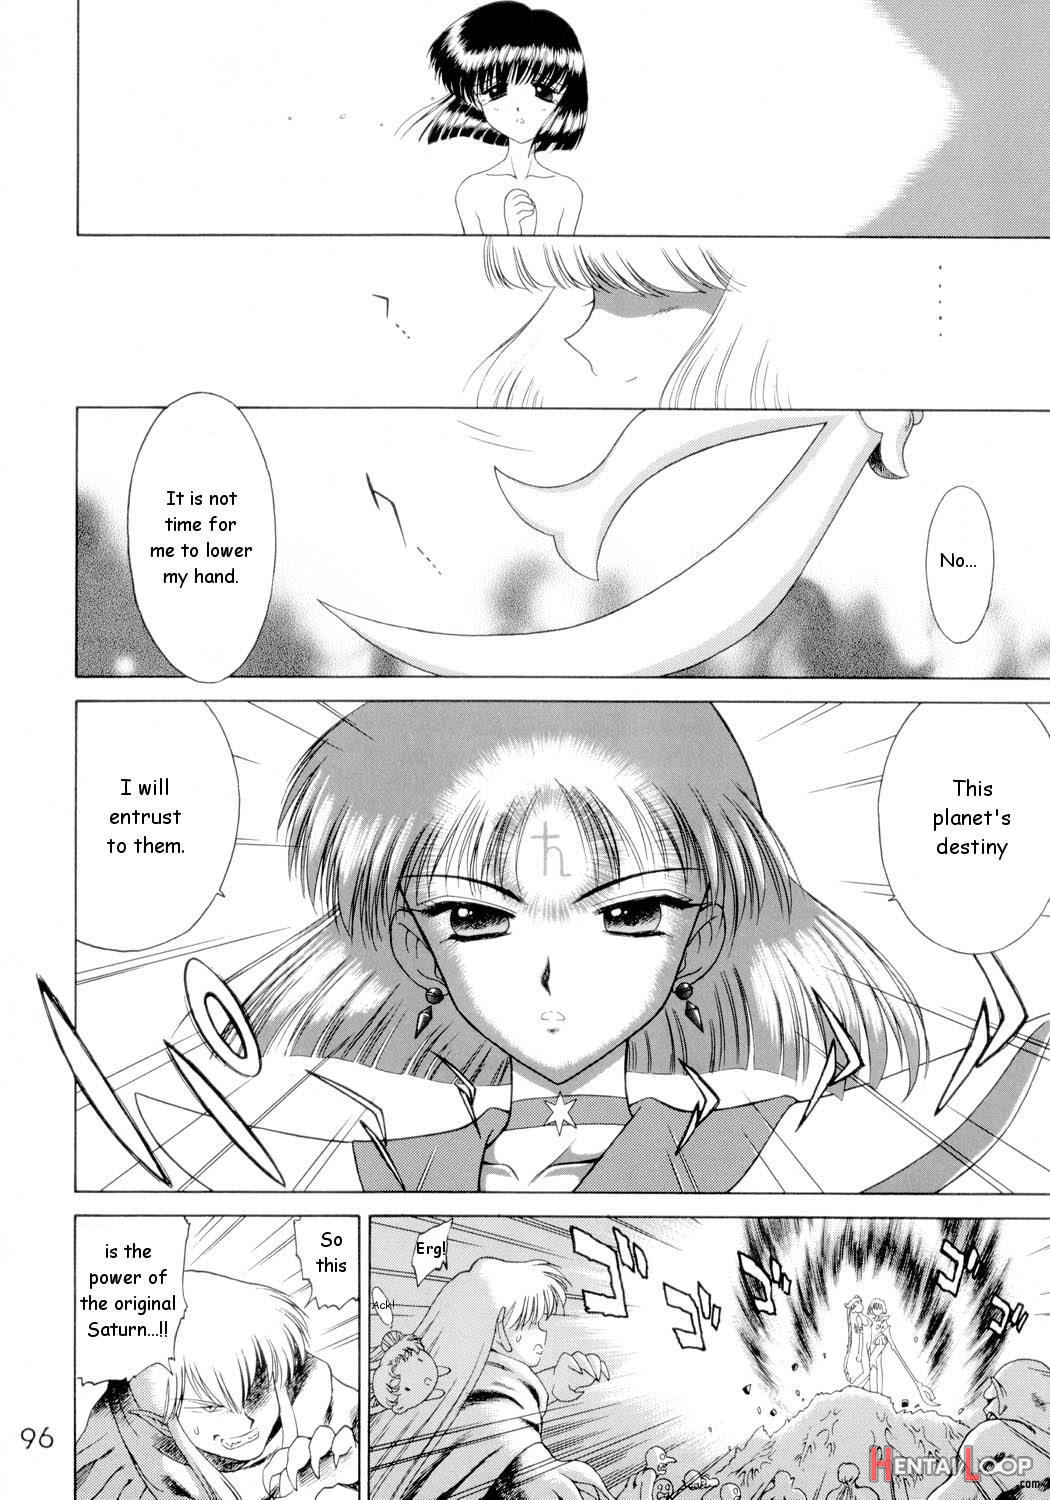 Submission Sailorstars page 95